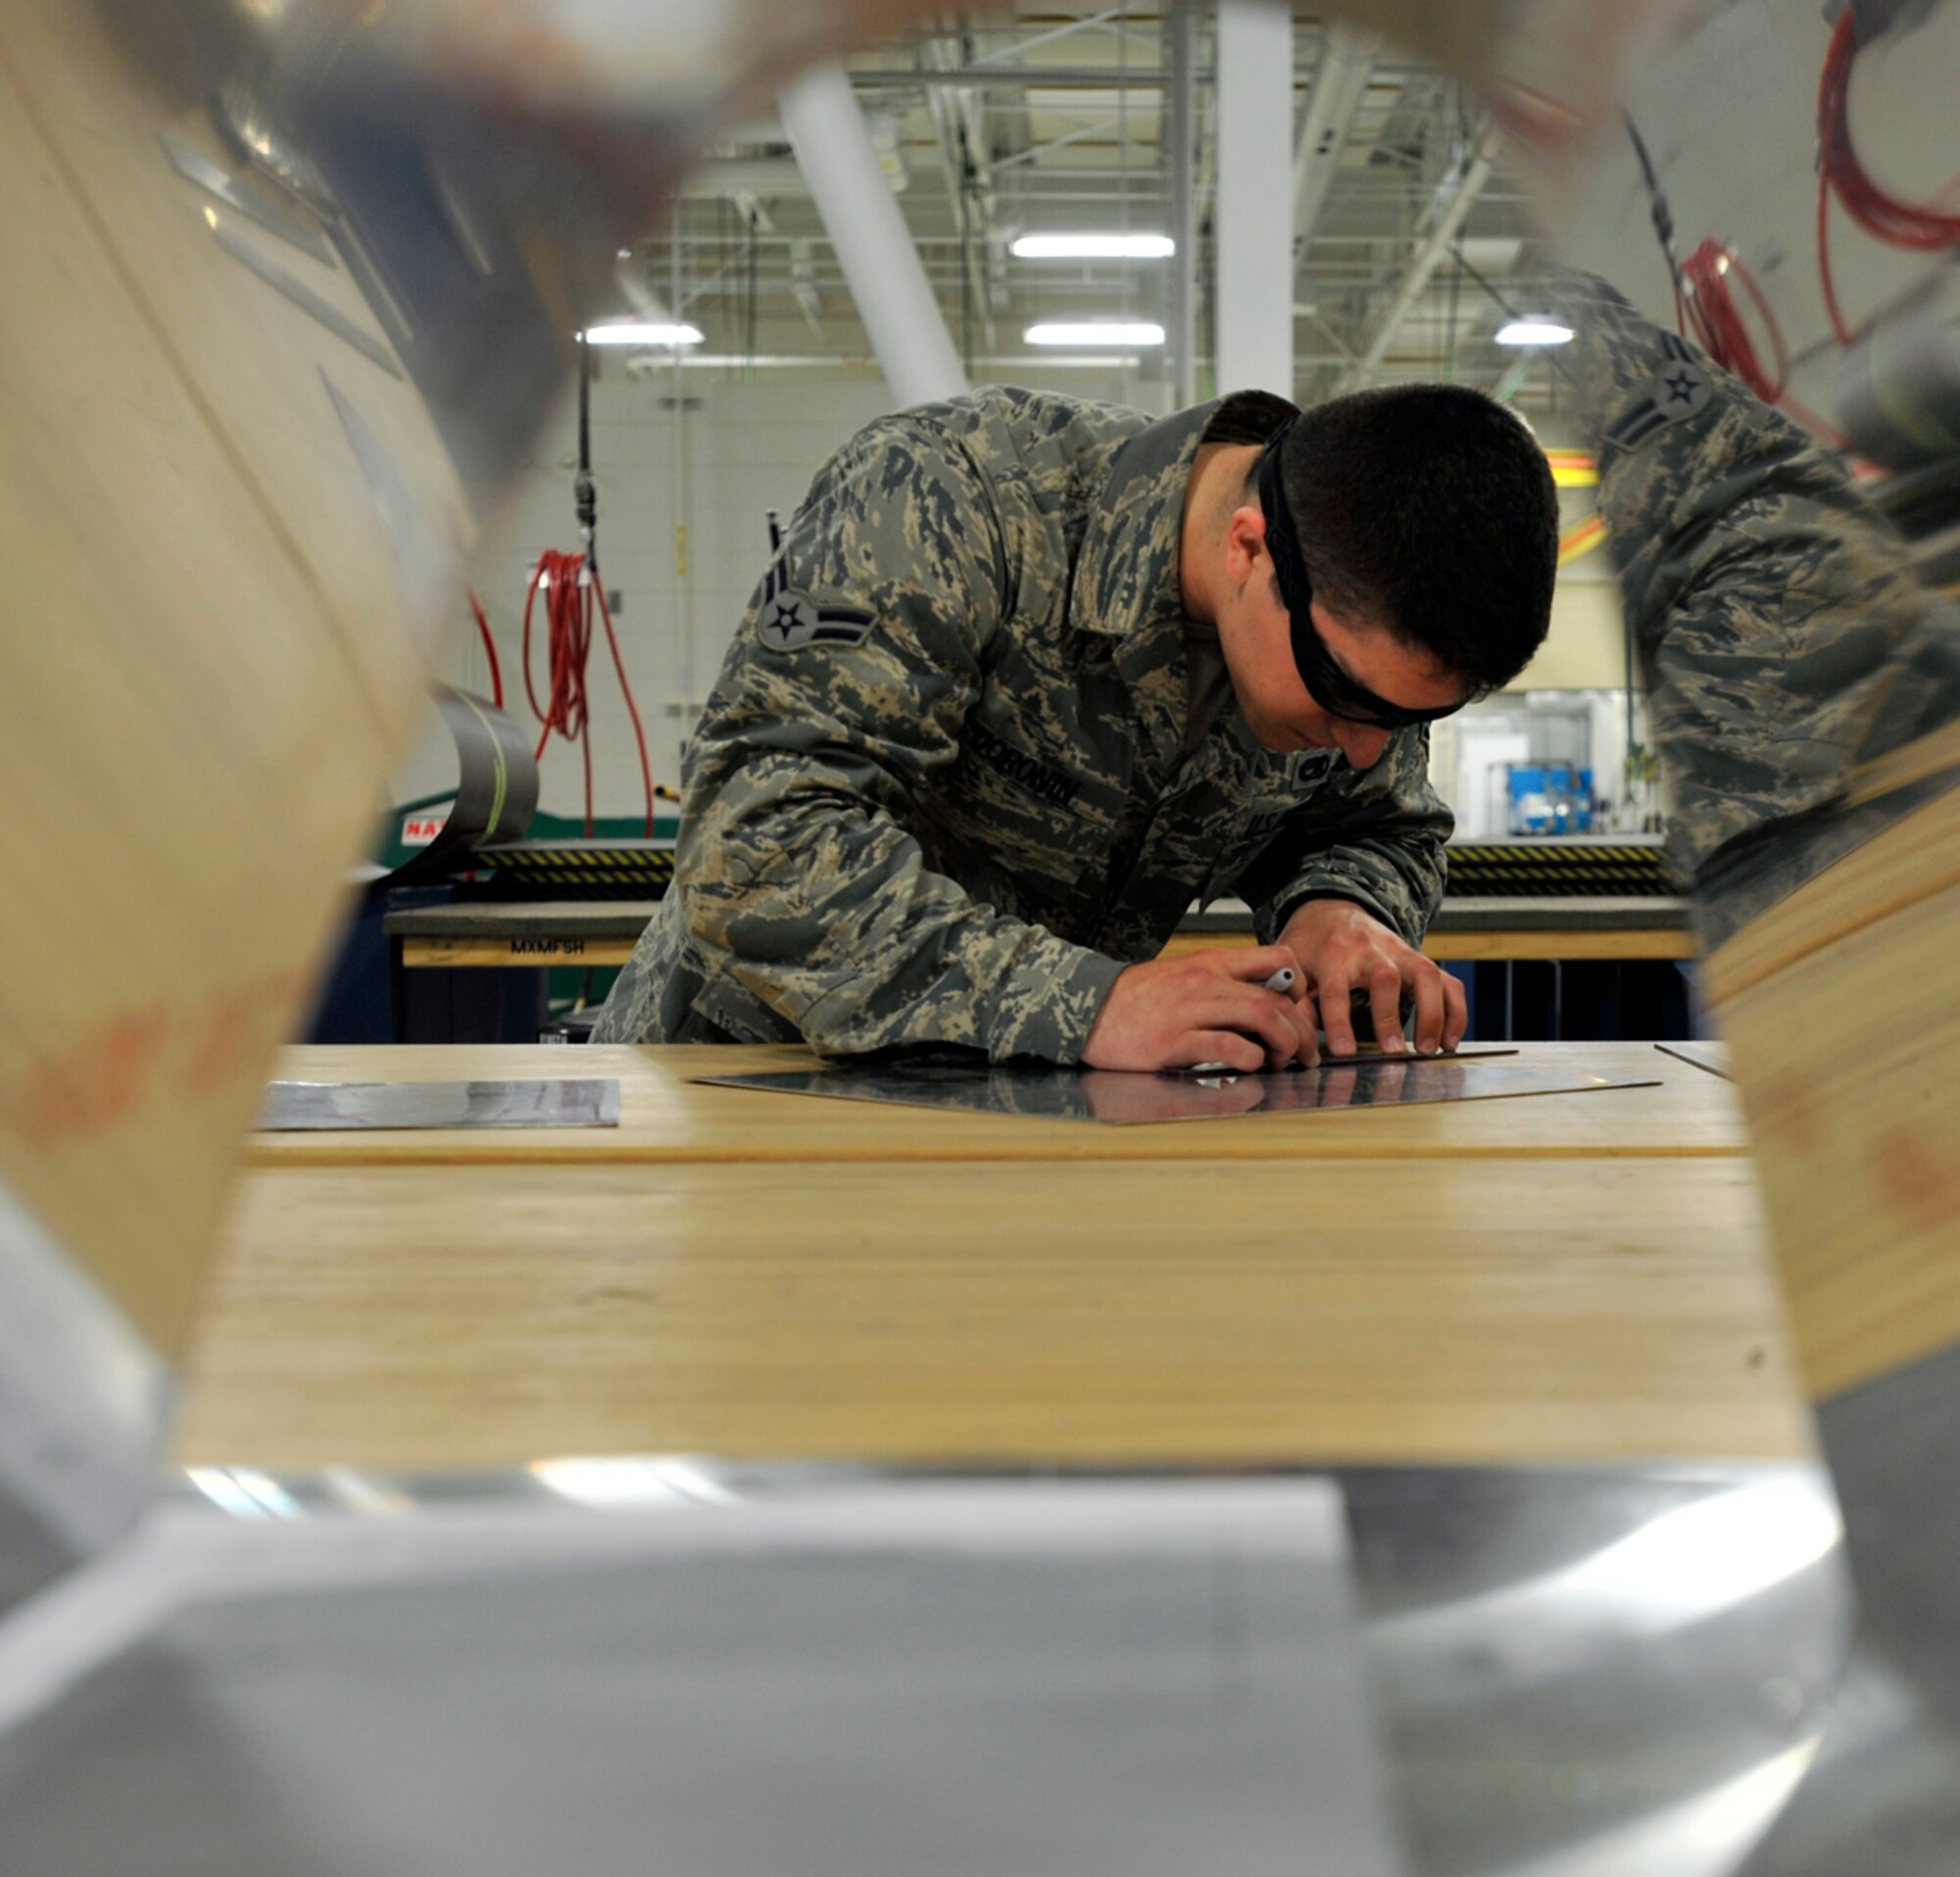 Airman 1st Class Devid Doronin, 3rd Maintenance Squadron aircraft structural maintenance apprentice, measures sheet metal to repair an aircraft on Joint Base Elmendorf-Richardson, Alaska, May 8, 2014. The Fabrication Flight personnel assess and fix small and large parts on aircraft that come and go from JBER’s airfield to keep the mission running and the personnel safe. (U.S. Air Force photo/Airman 1st Class Tammie Ramsouer)